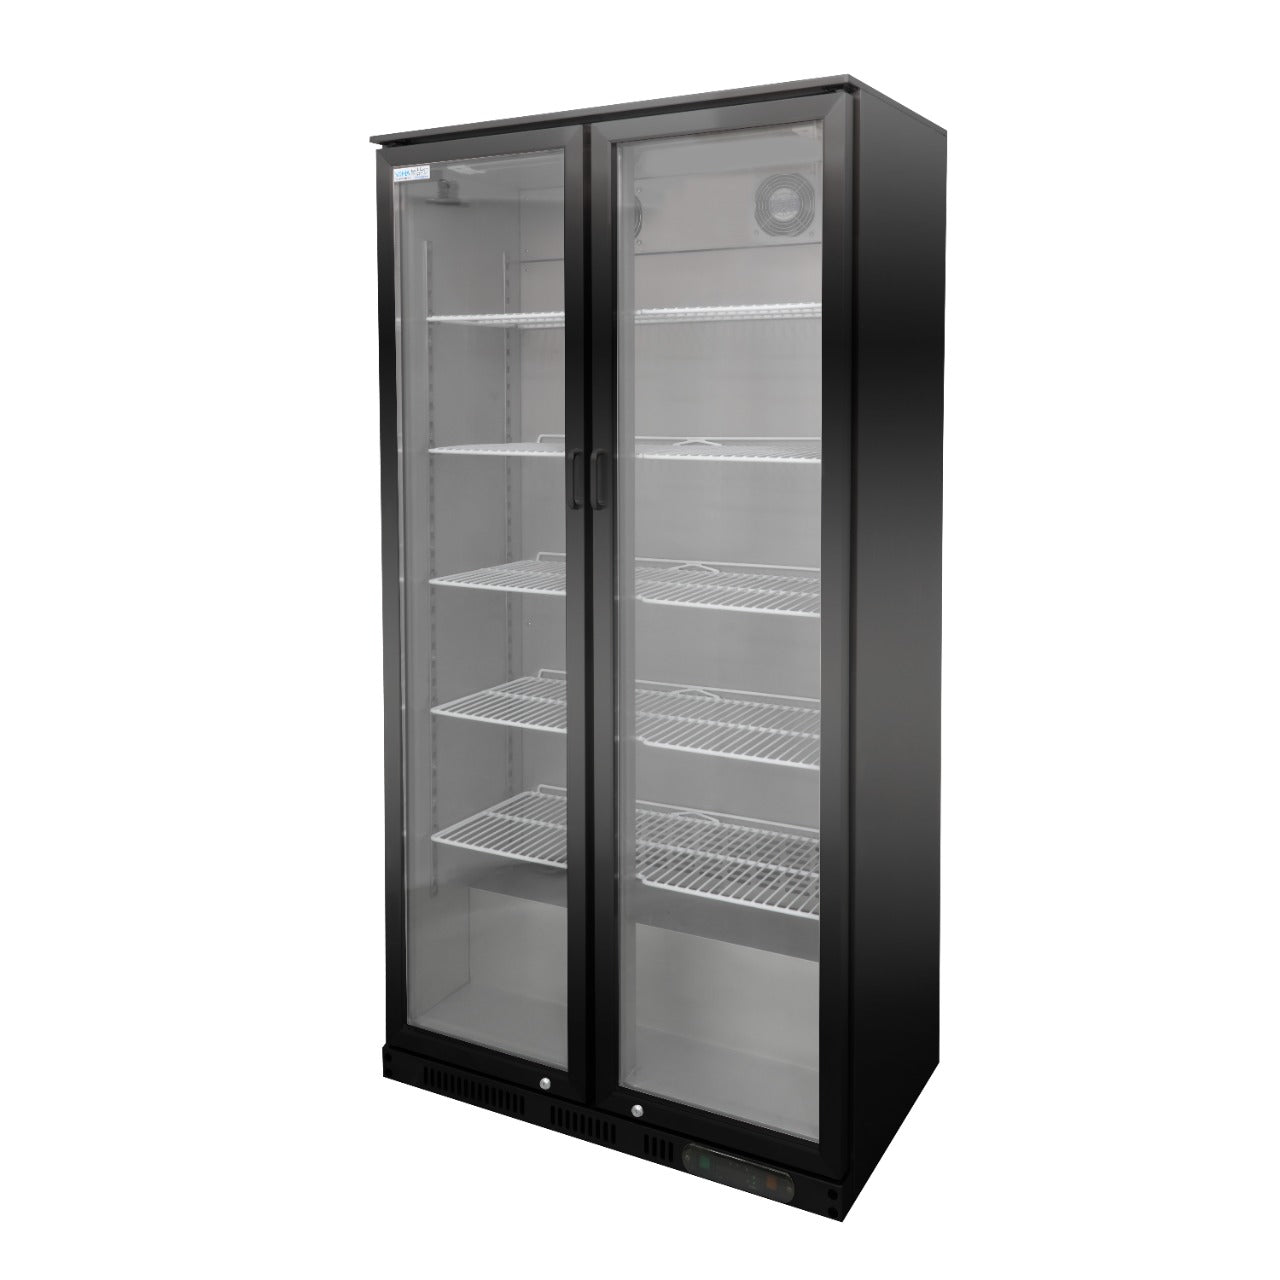 SOFBC-UP2 BS, Two Door Upright Bottle Cooler, (Black Stainless Steel)